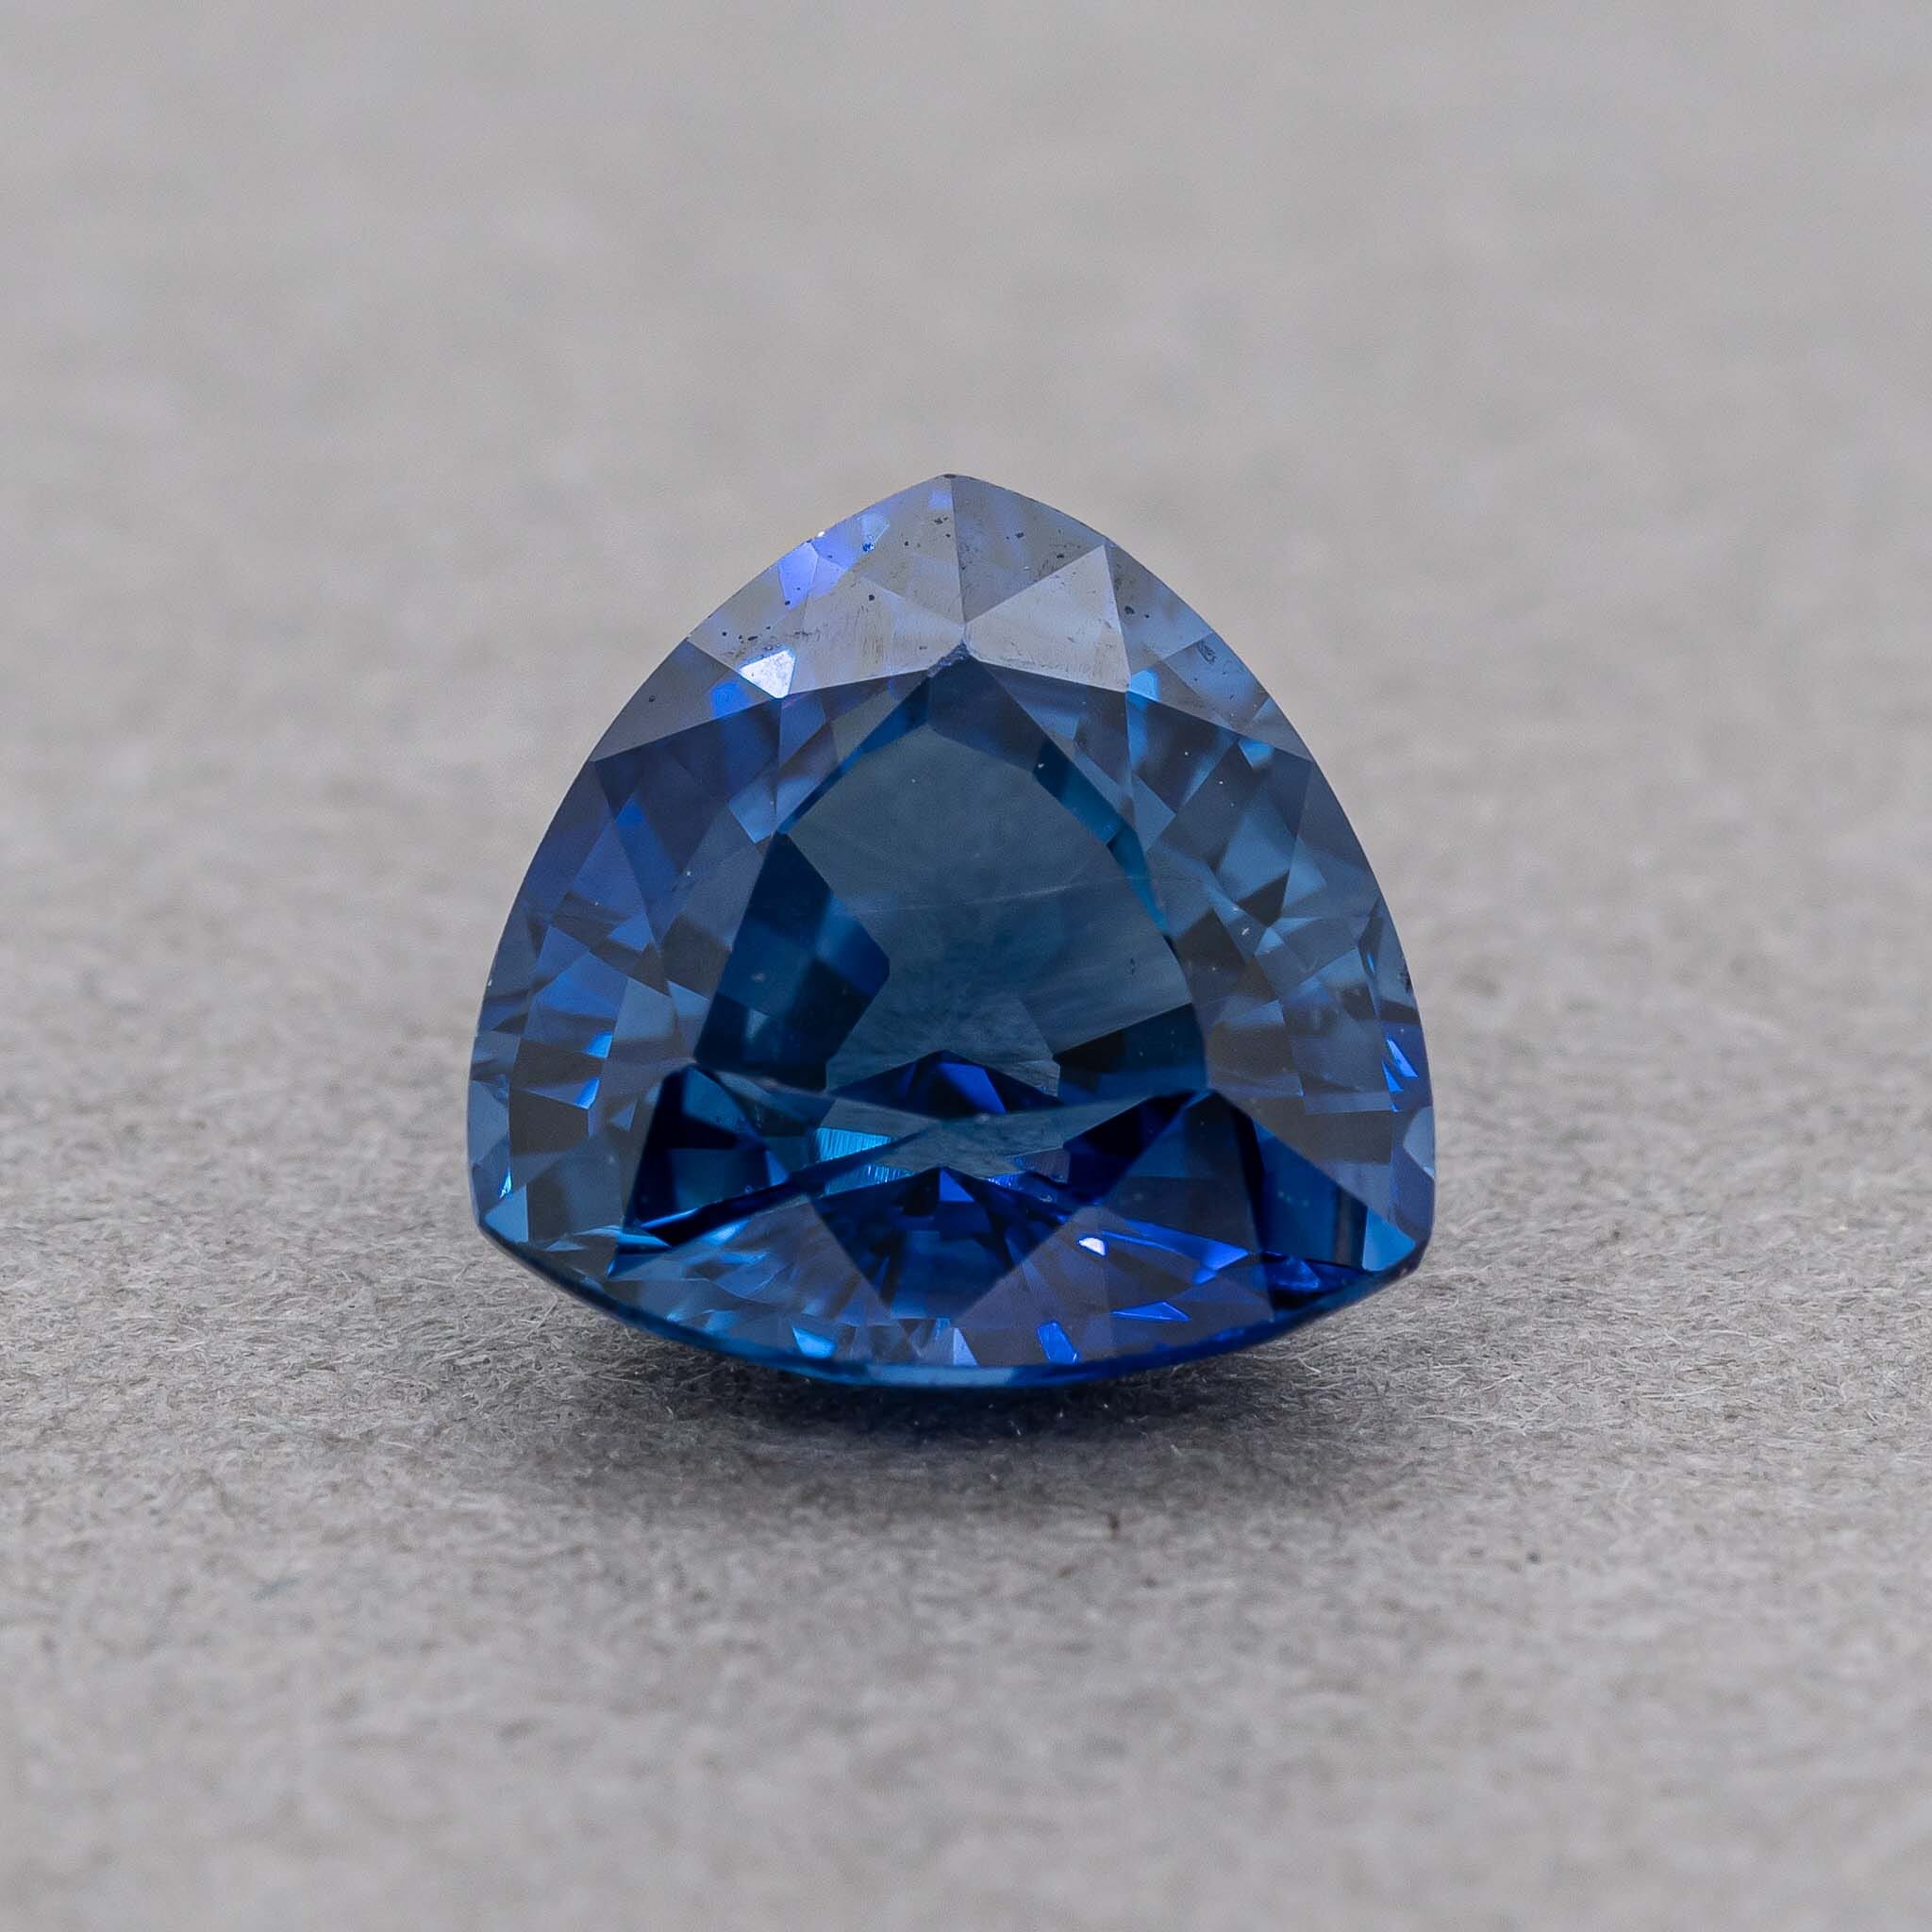 9SP63A9 - 1.86ct